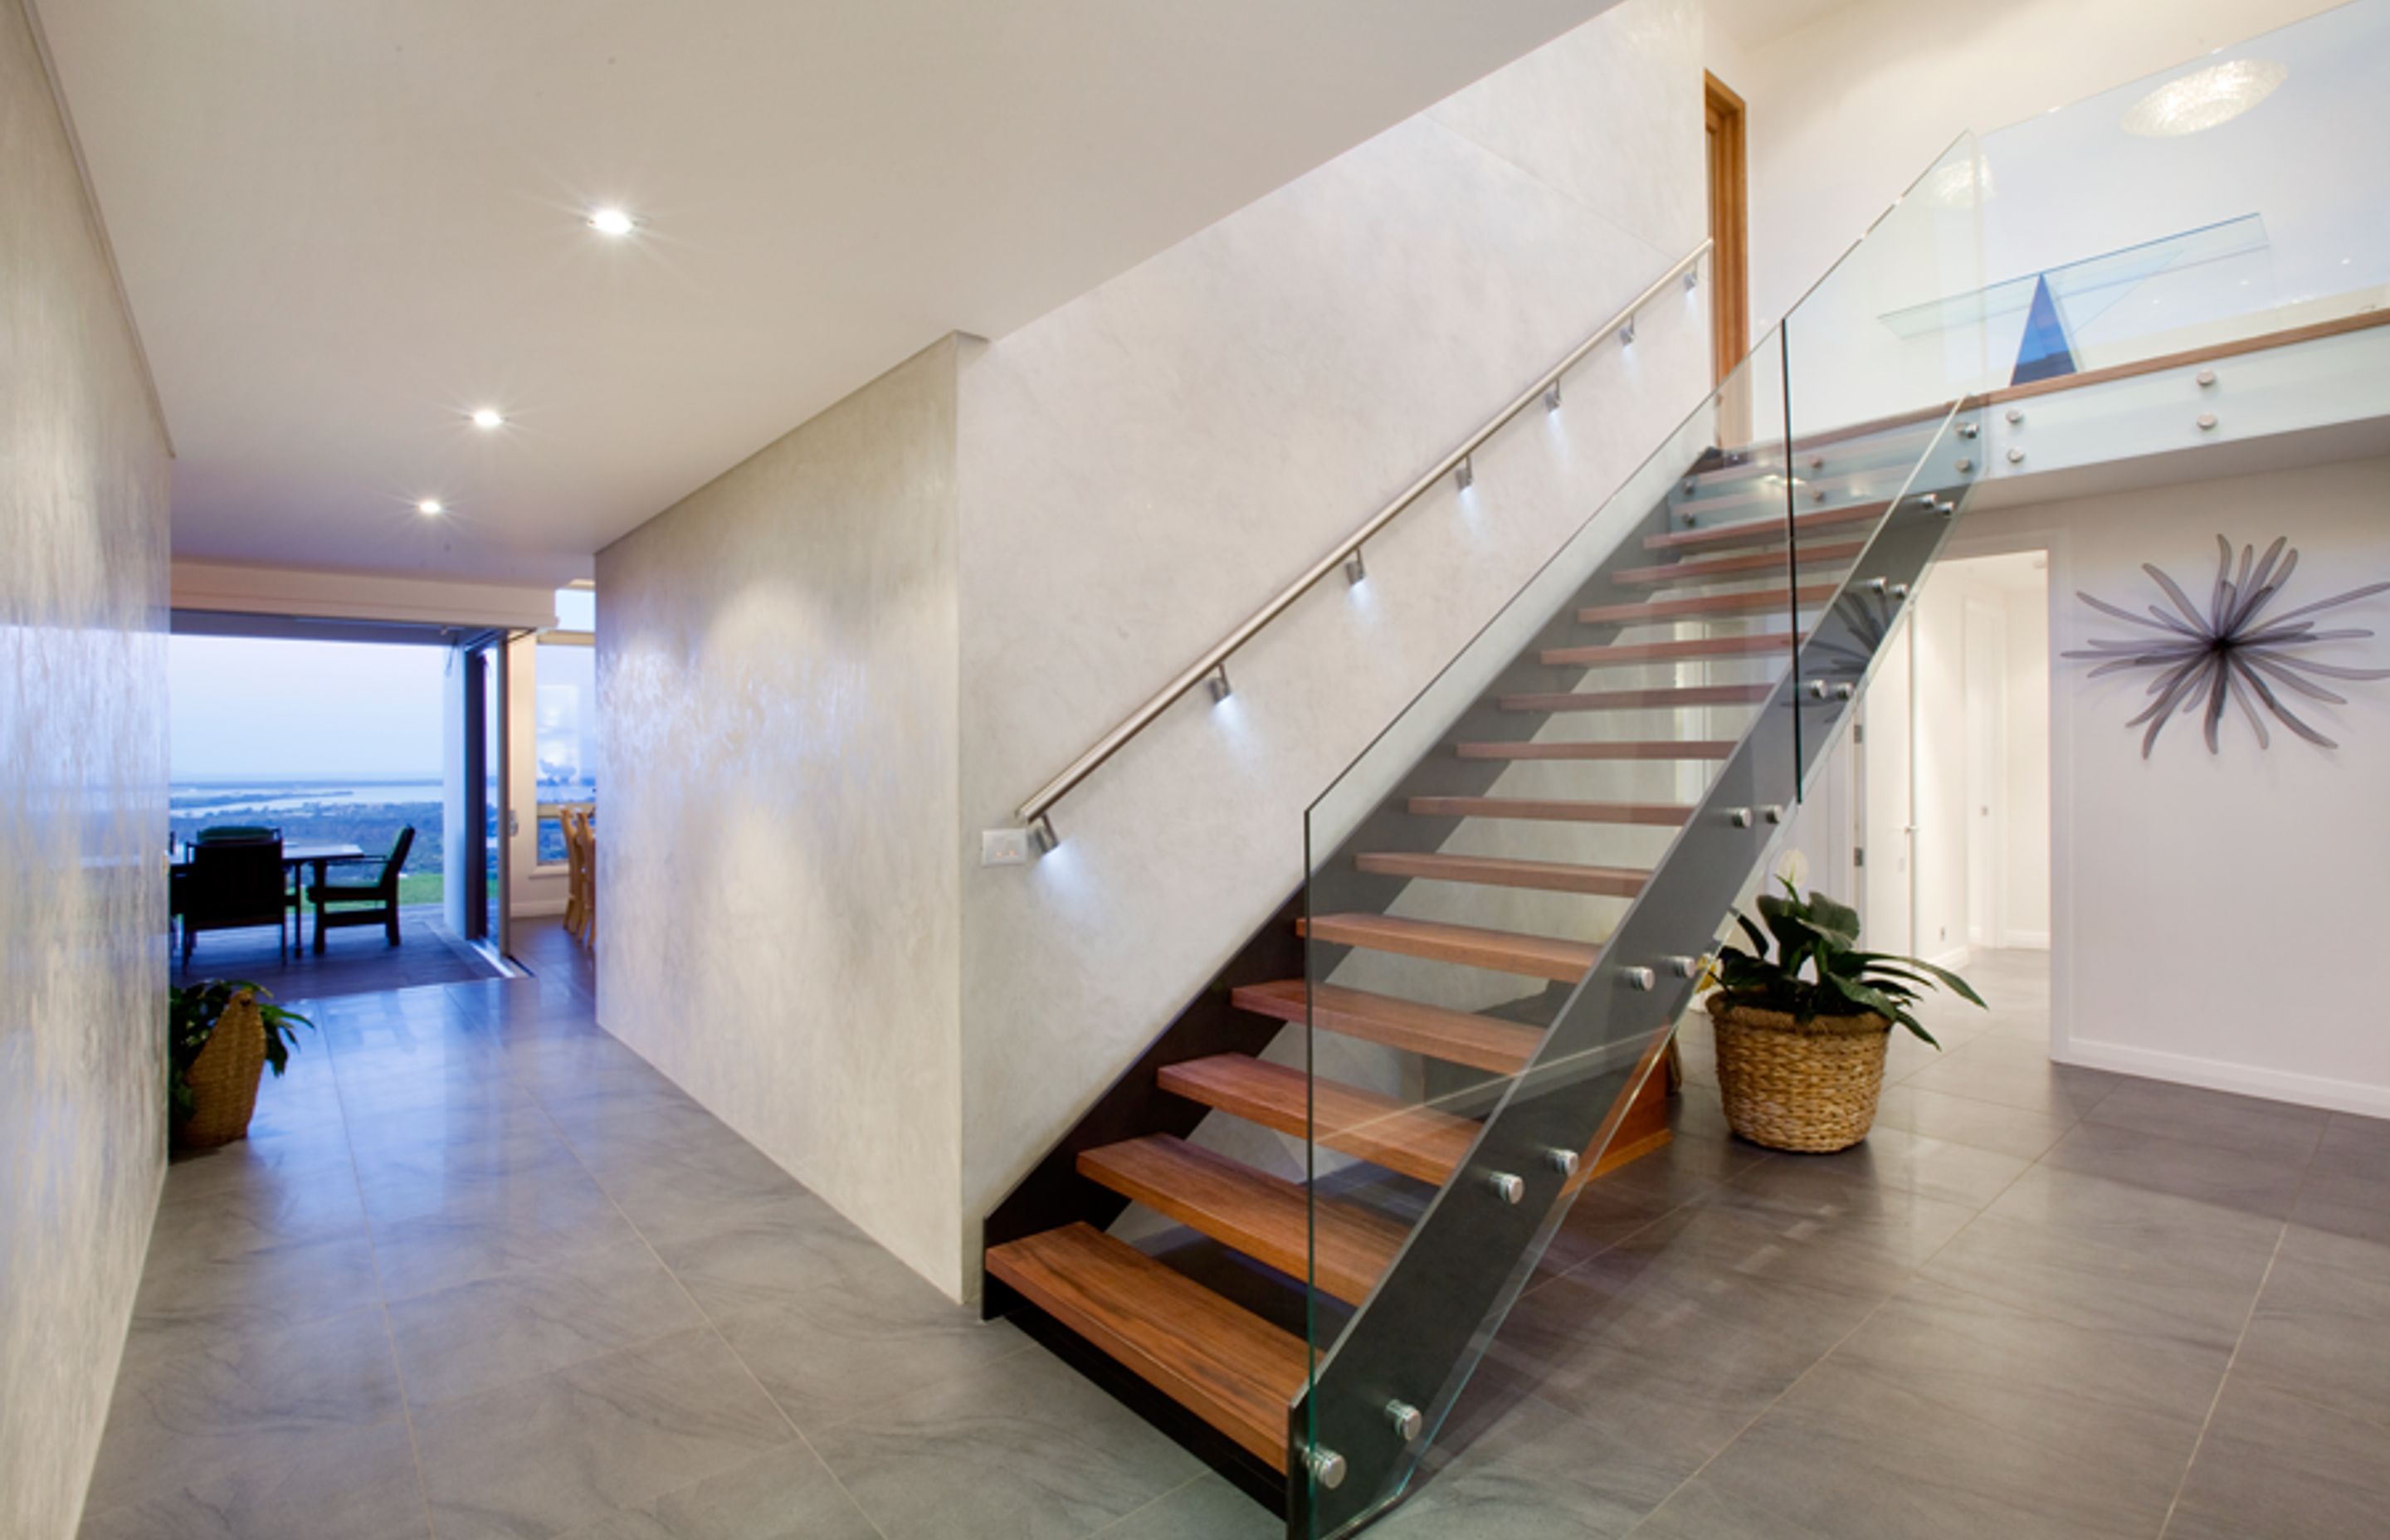 A striking floating stairwell with timber treads in the entry provides access to the upstairs bedroom areas.